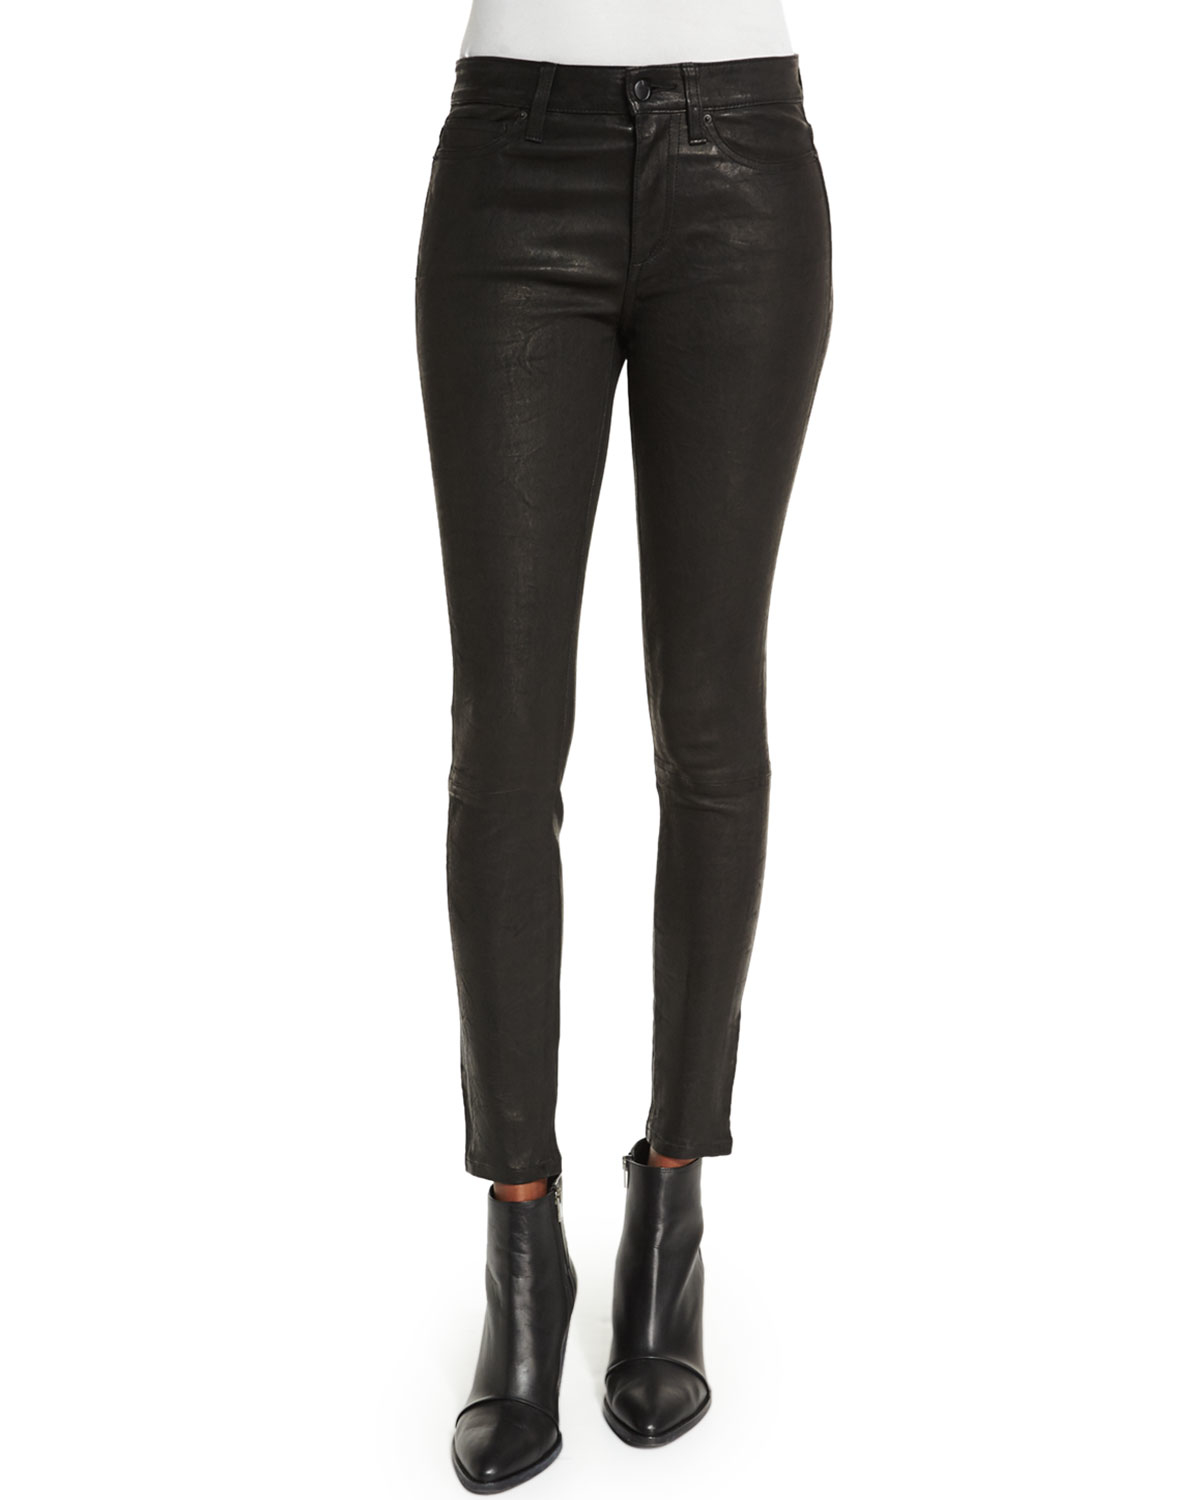 Lyst - Joe's jeans Distressed Leather Ankle Pants in Black